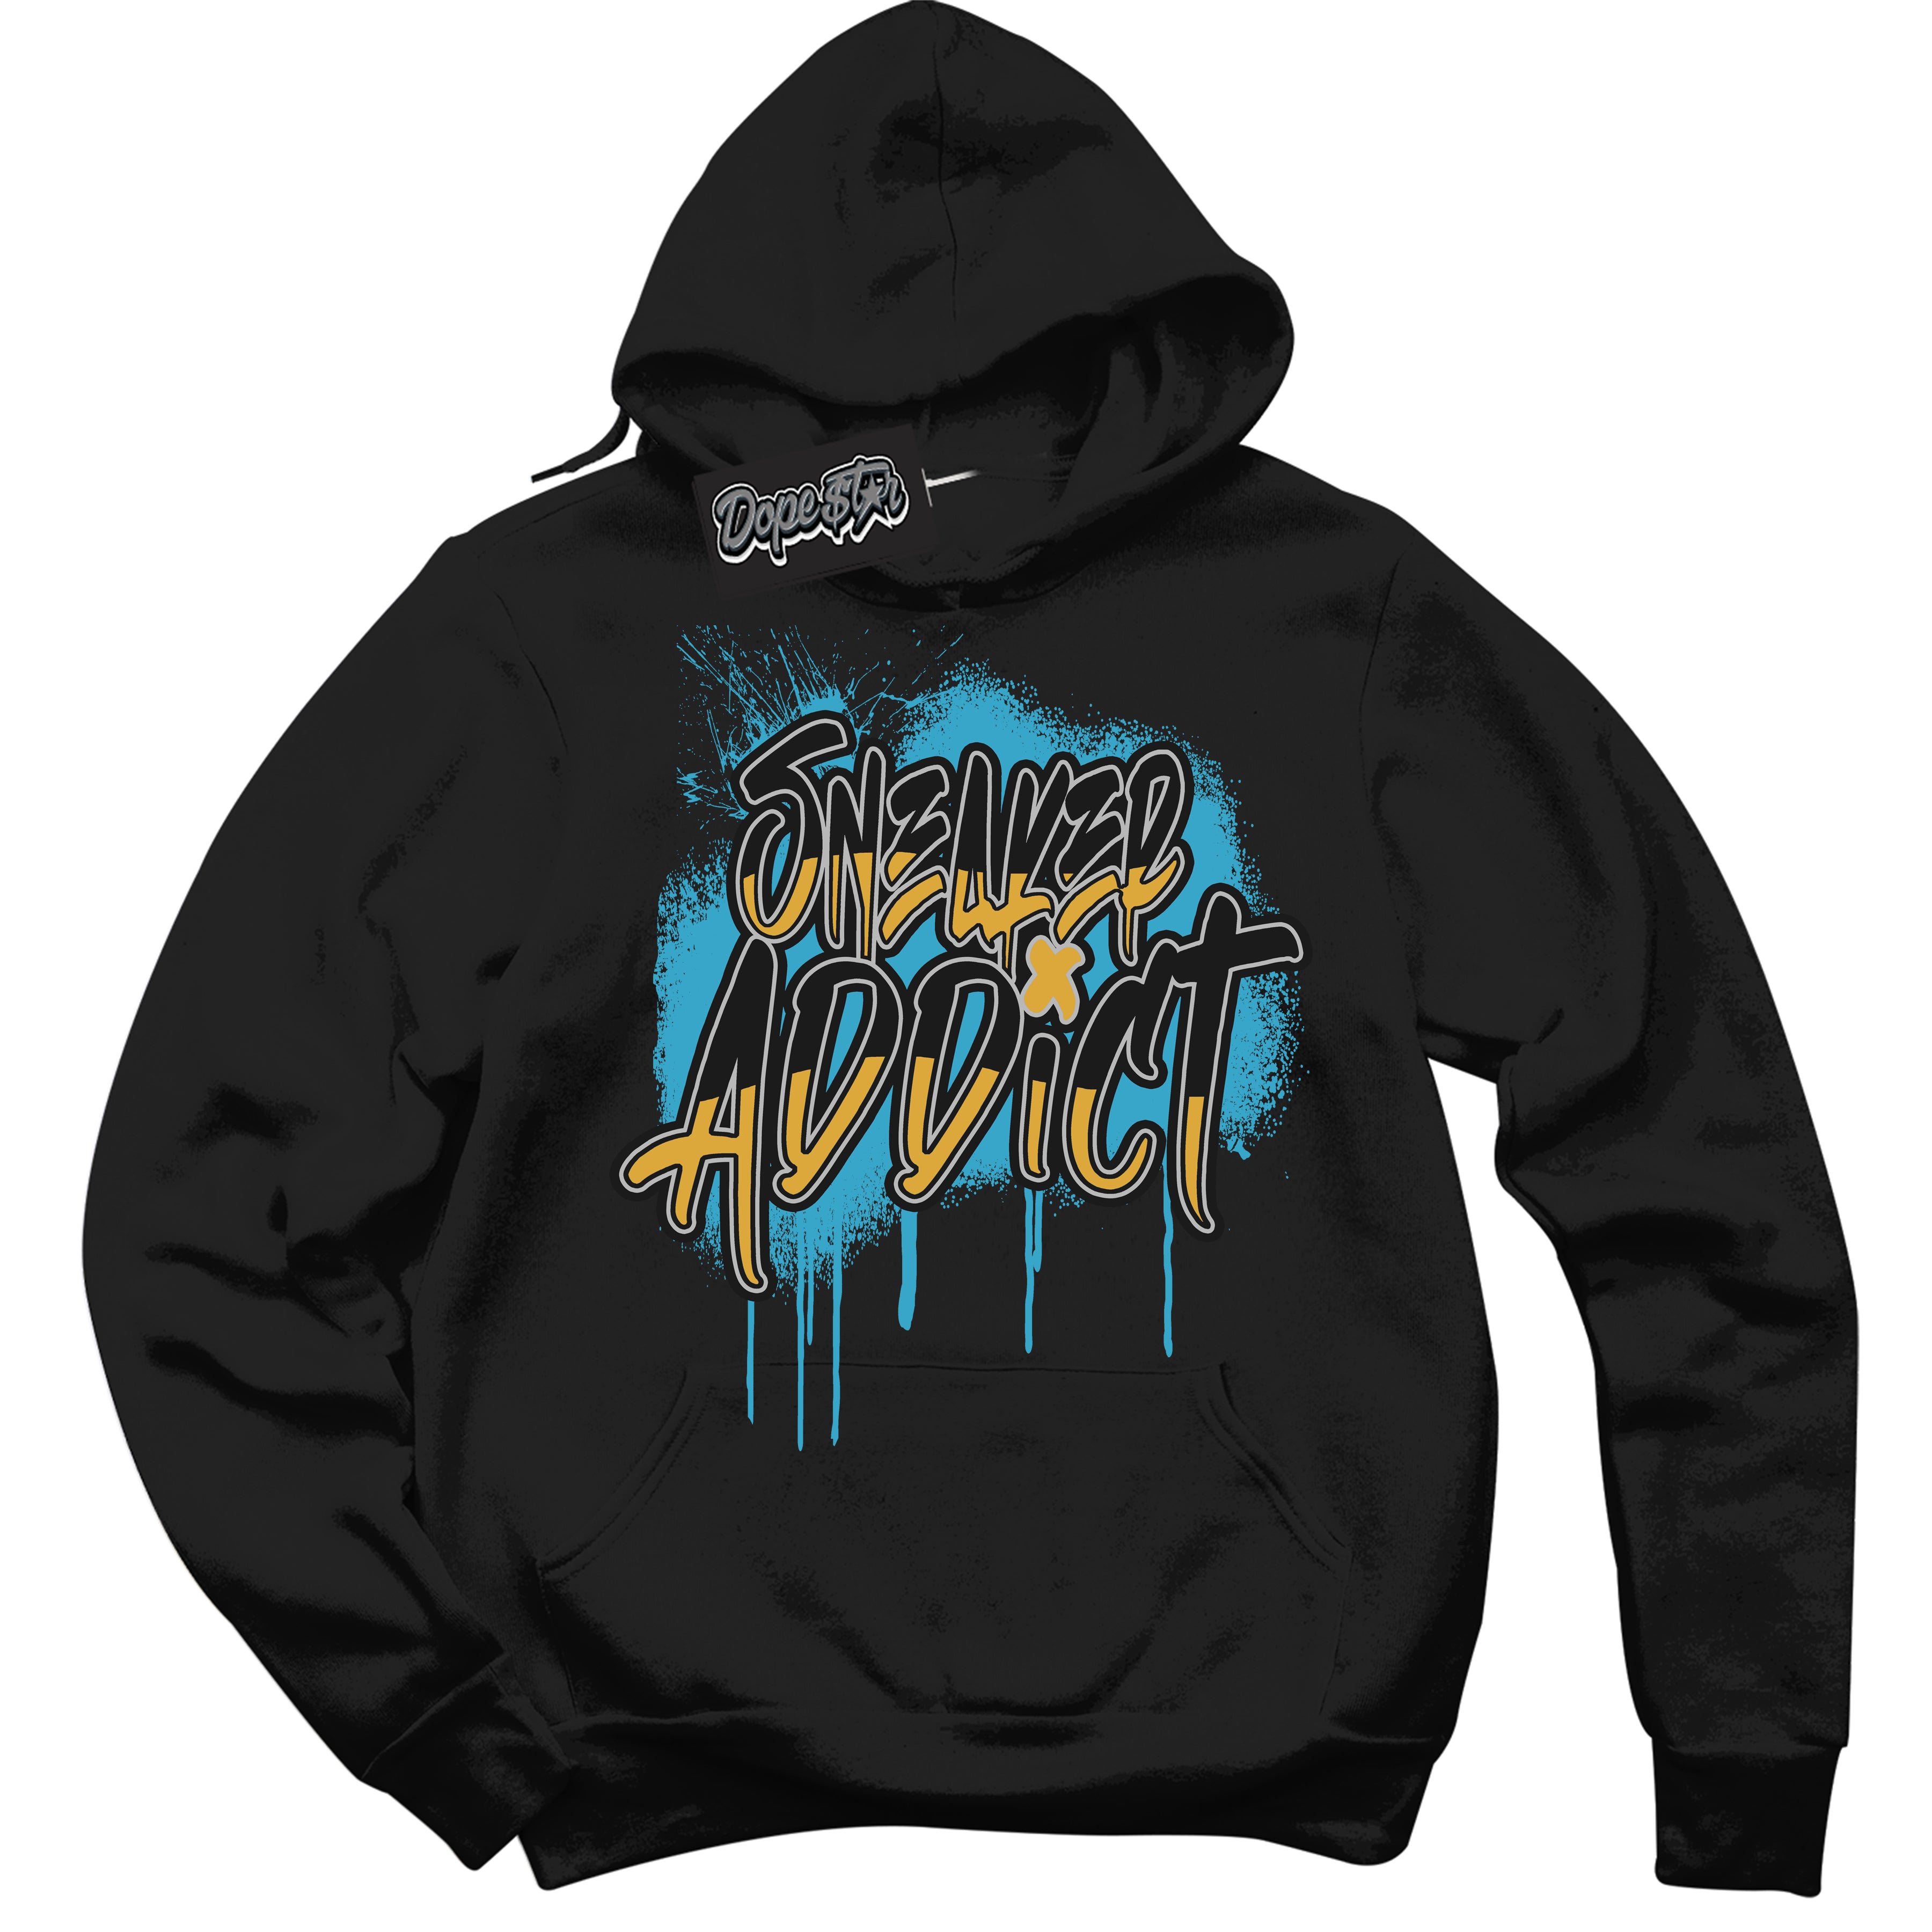 Cool Black Graphic Hoodie with “ Sneaker addict “ print, that perfectly matches Air Jordan 5 AQUA  sneakers